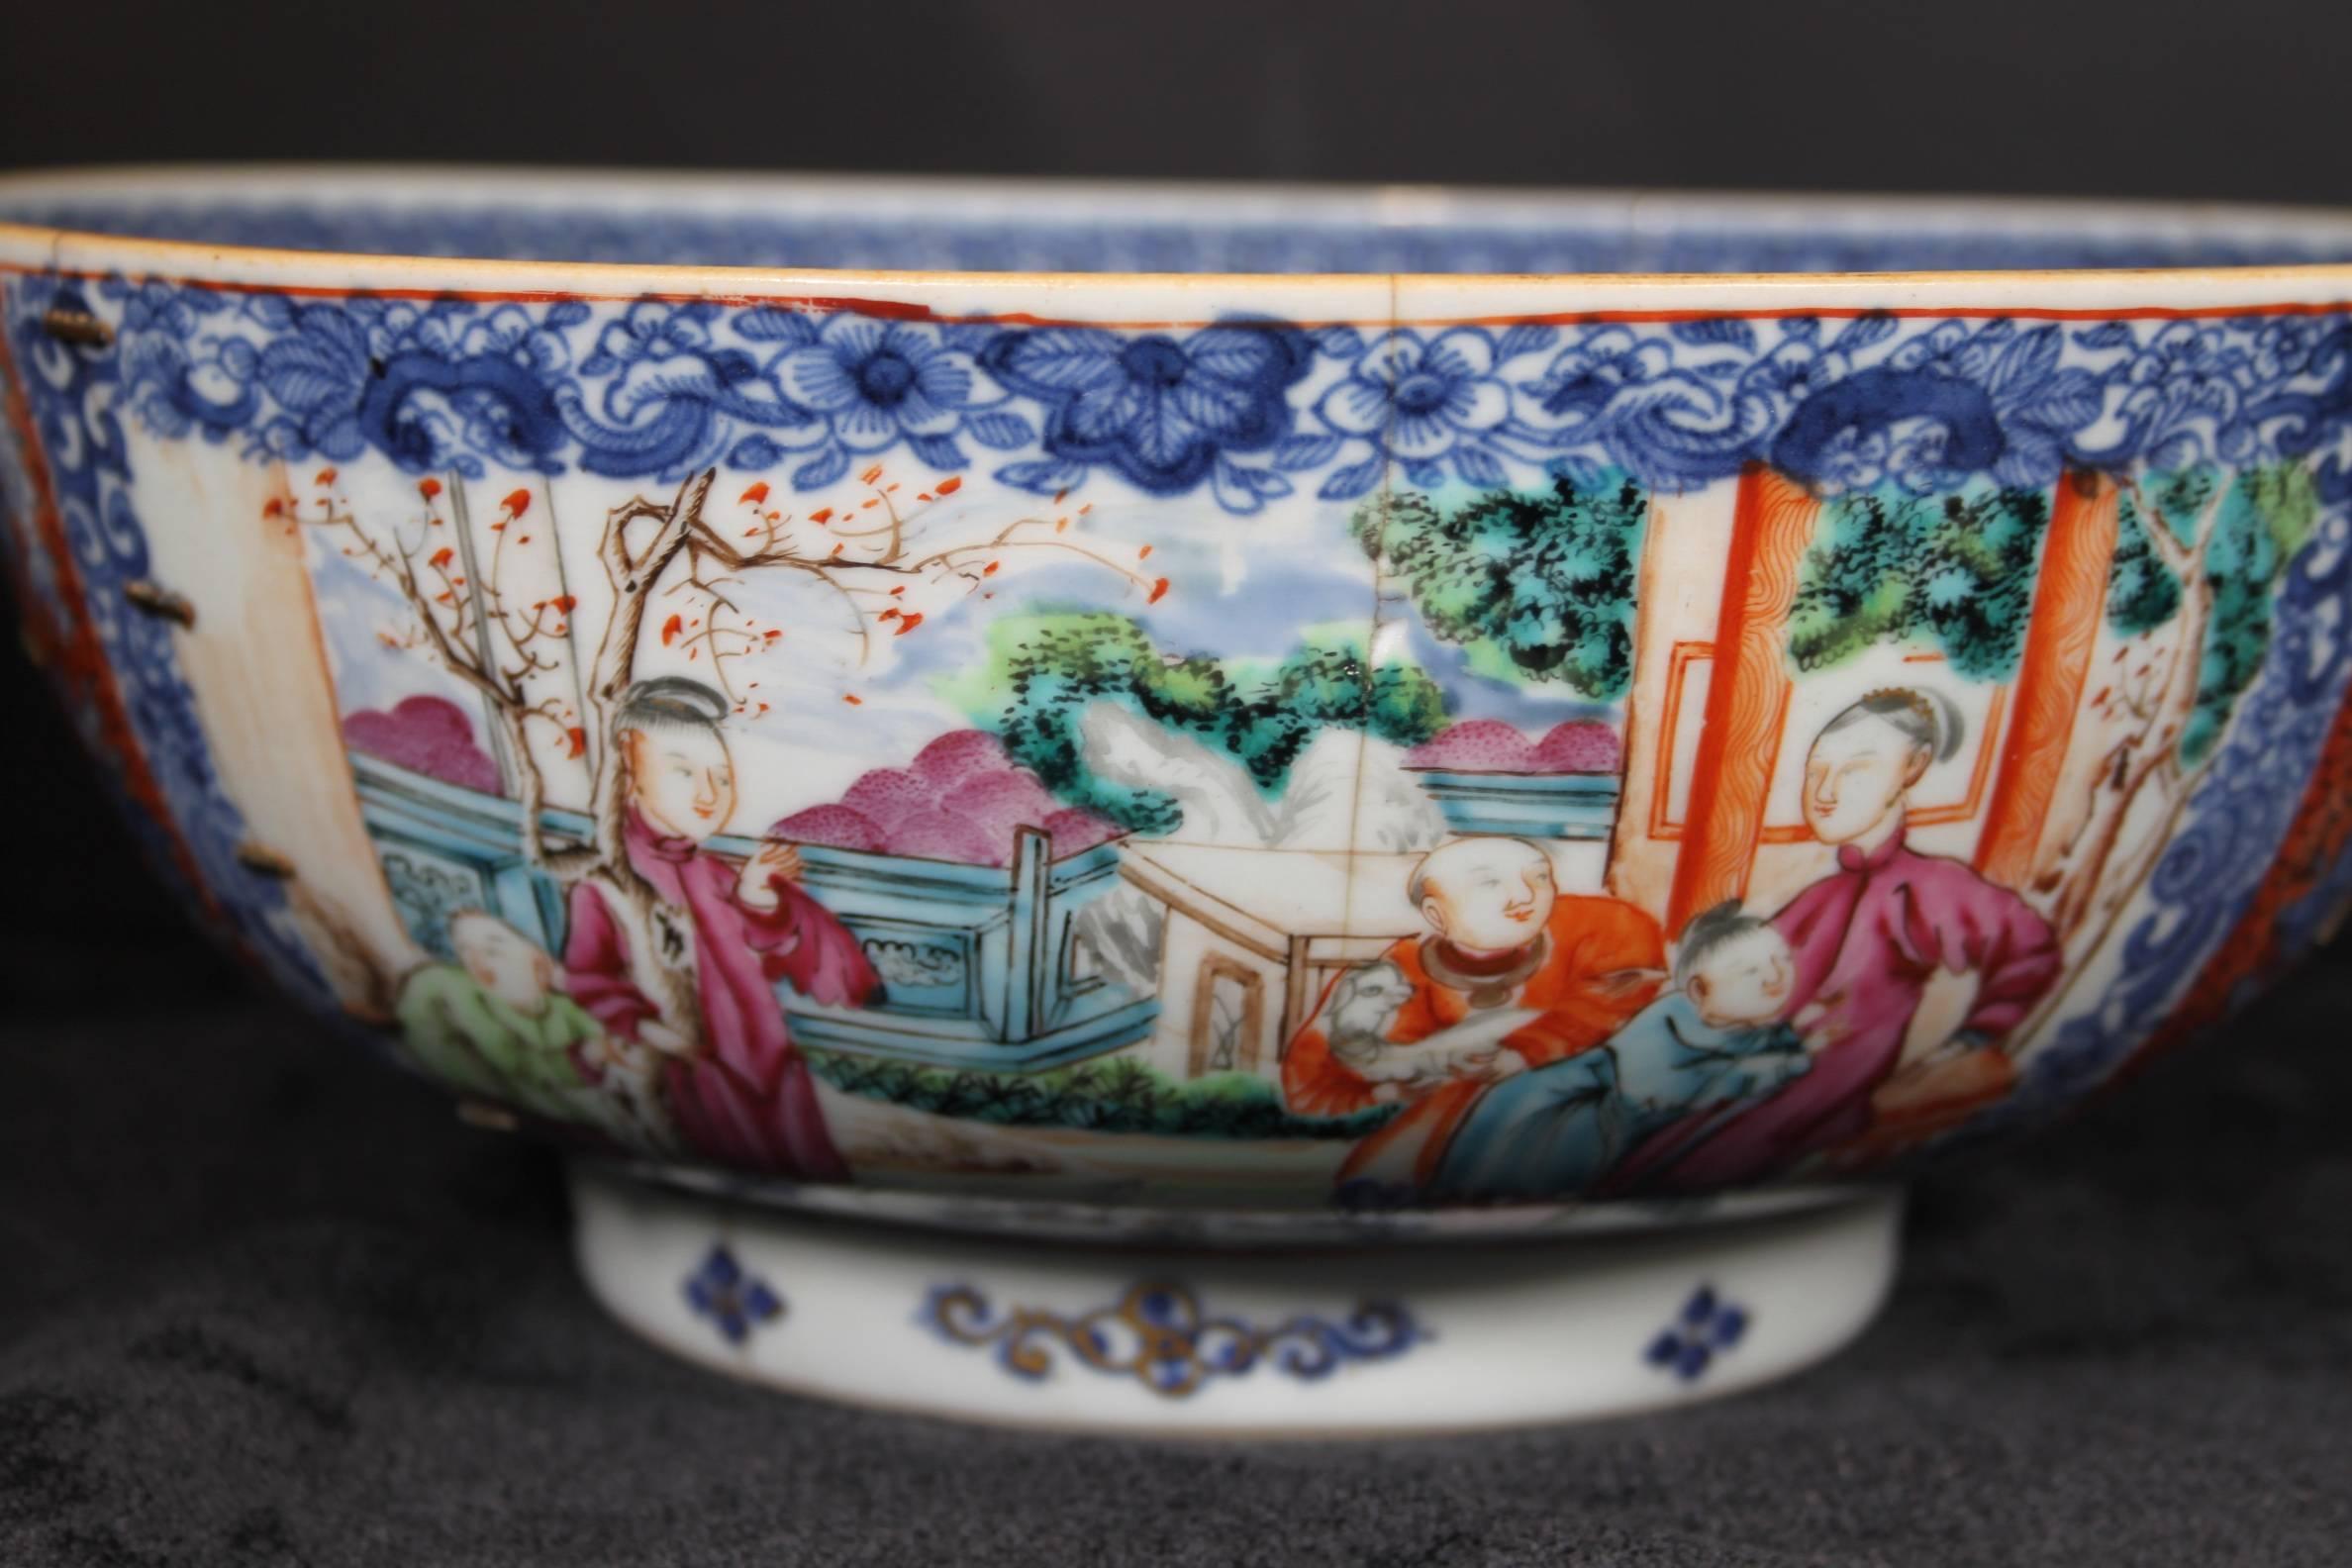 18th Century Qianlong Qing Dynasty Chinese Export Ware Porcelain Punch Bowl For Sale 1